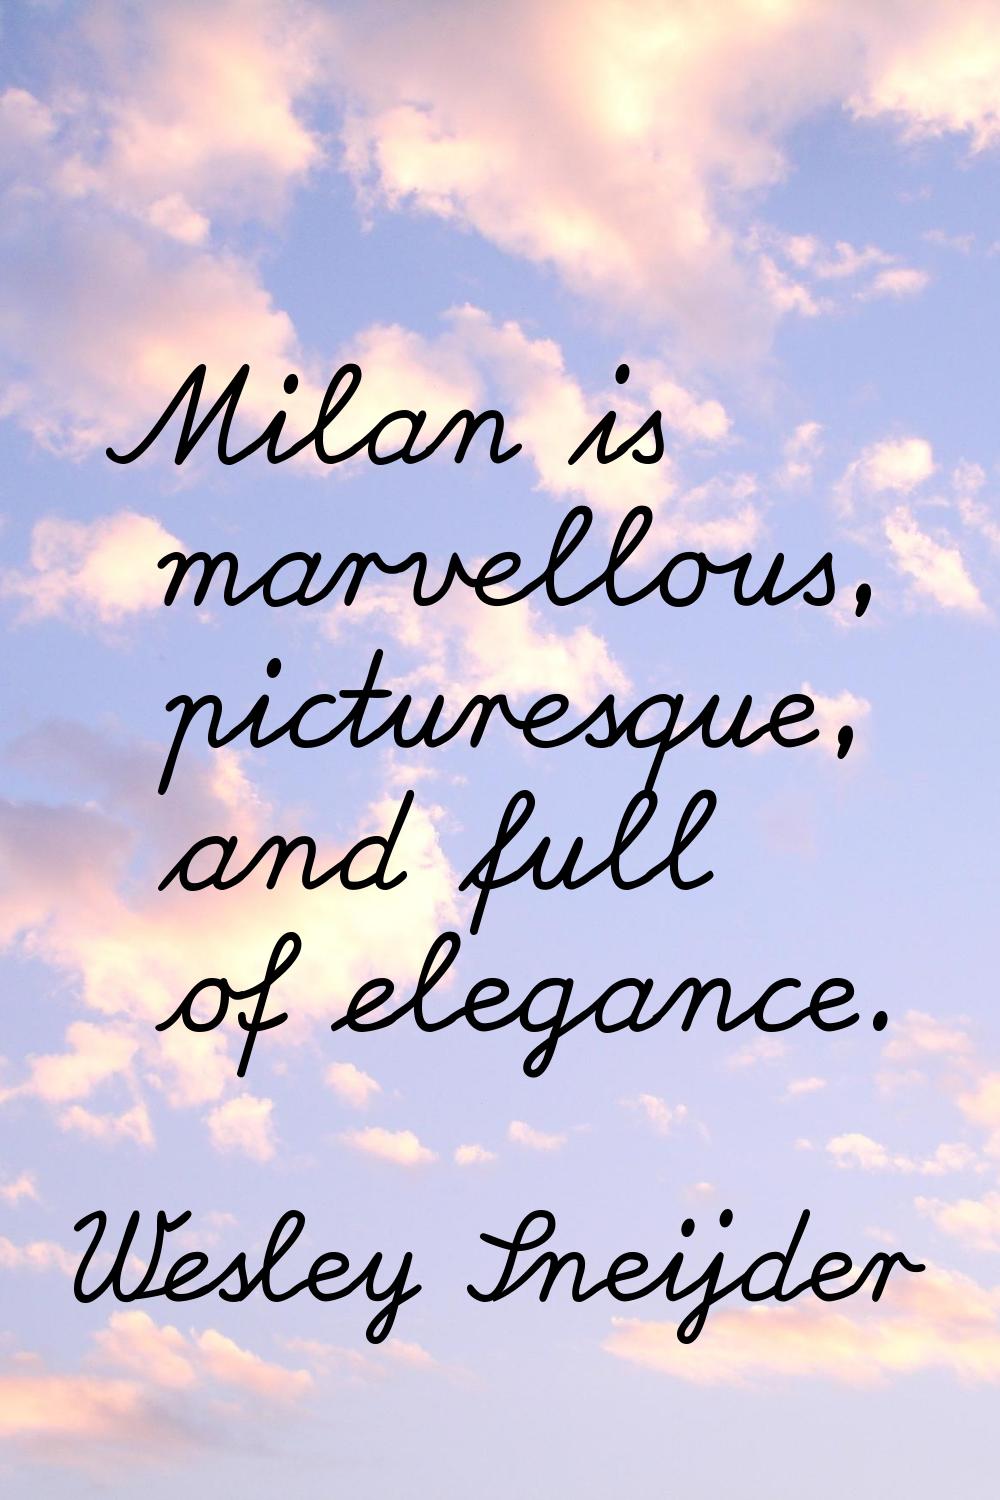 Milan is marvellous, picturesque, and full of elegance.